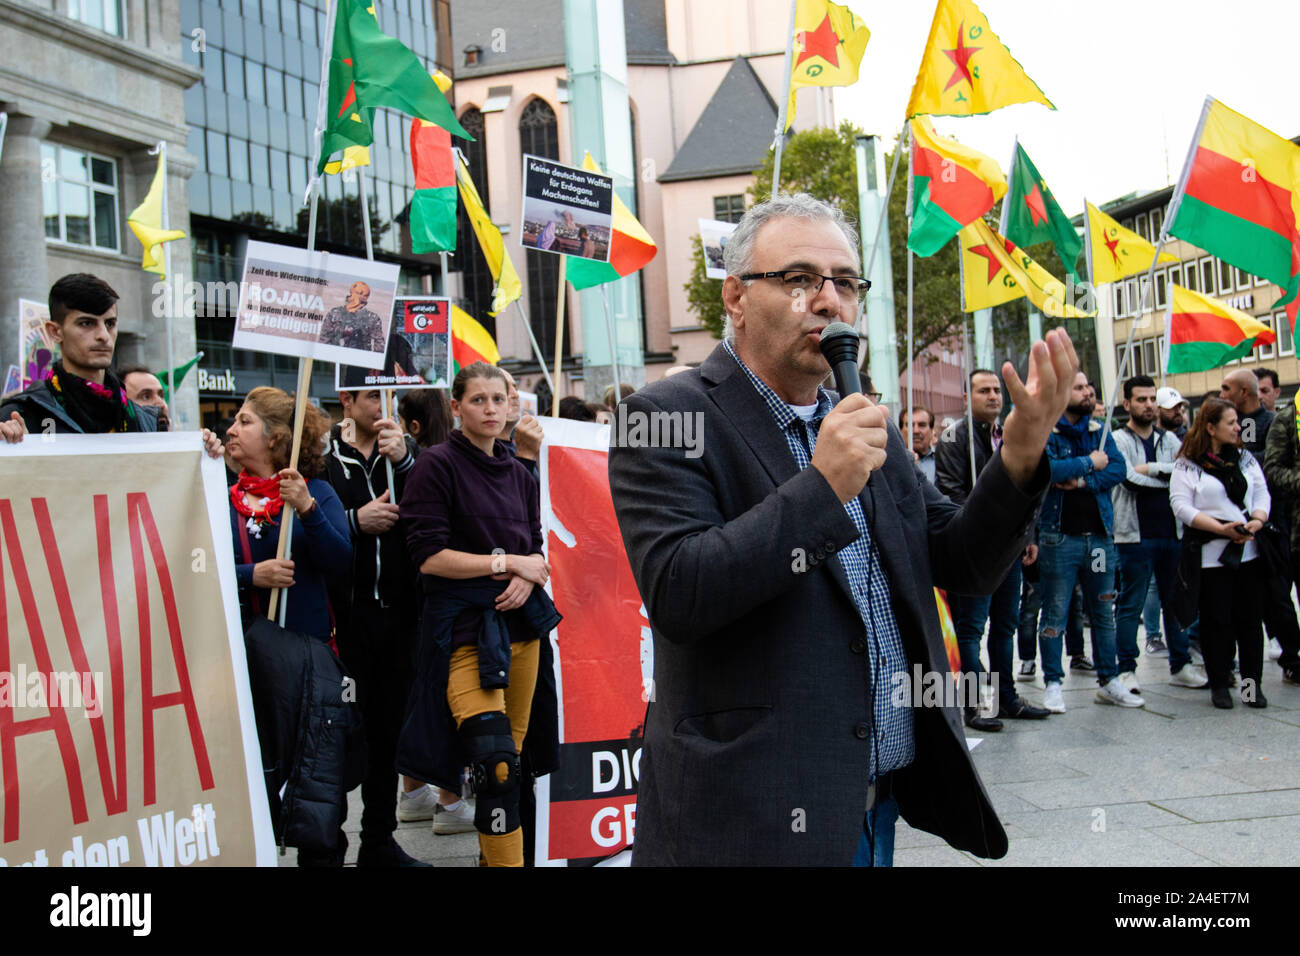 A protest speaks during the demonstration.Demonstrators protest against the military operations of Turkey against Syria and Erdogans Politik. Stock Photo